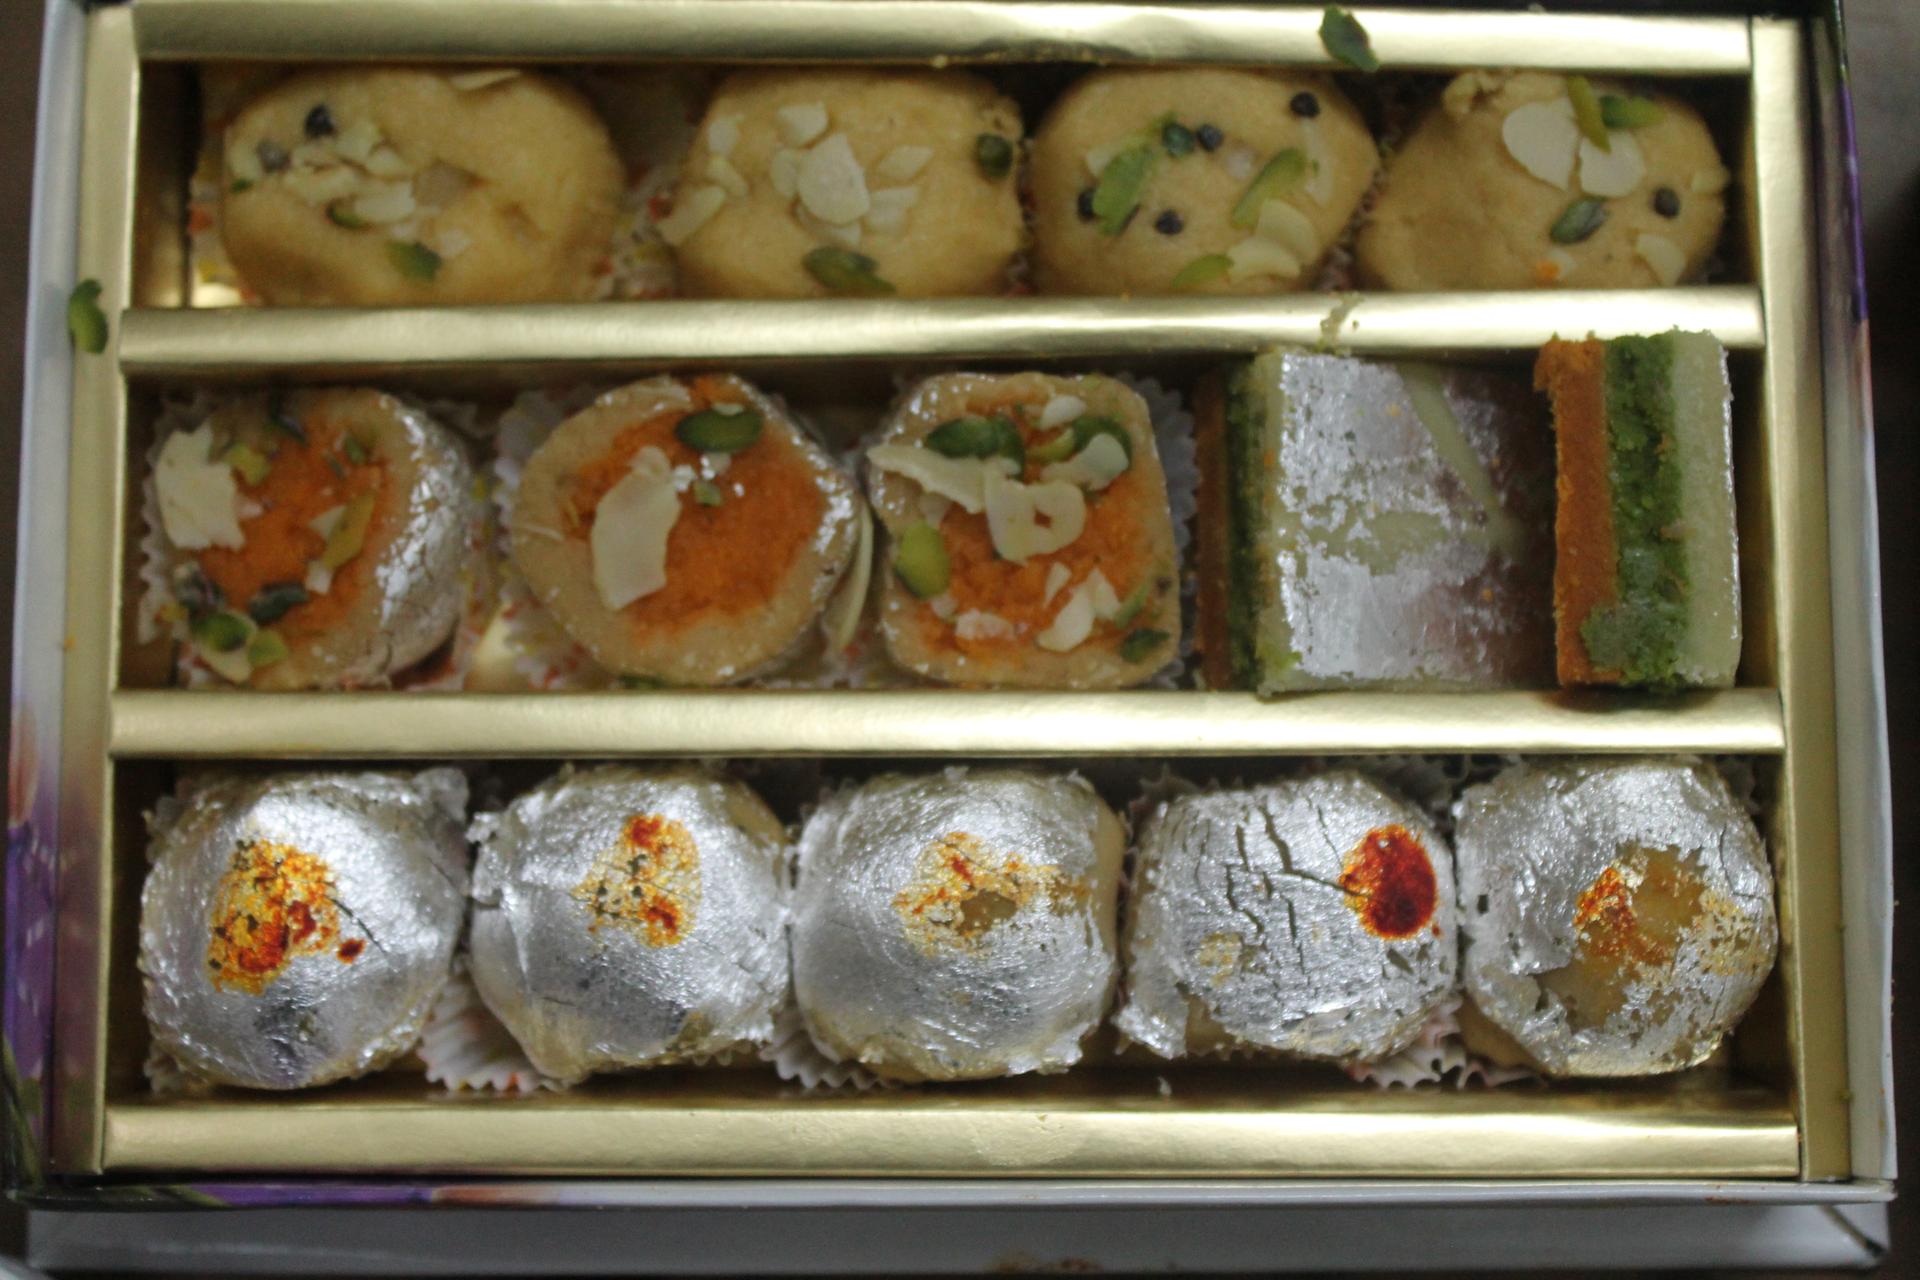 A box of Mithai, the sweets that are an ever-present staple of social life in India.